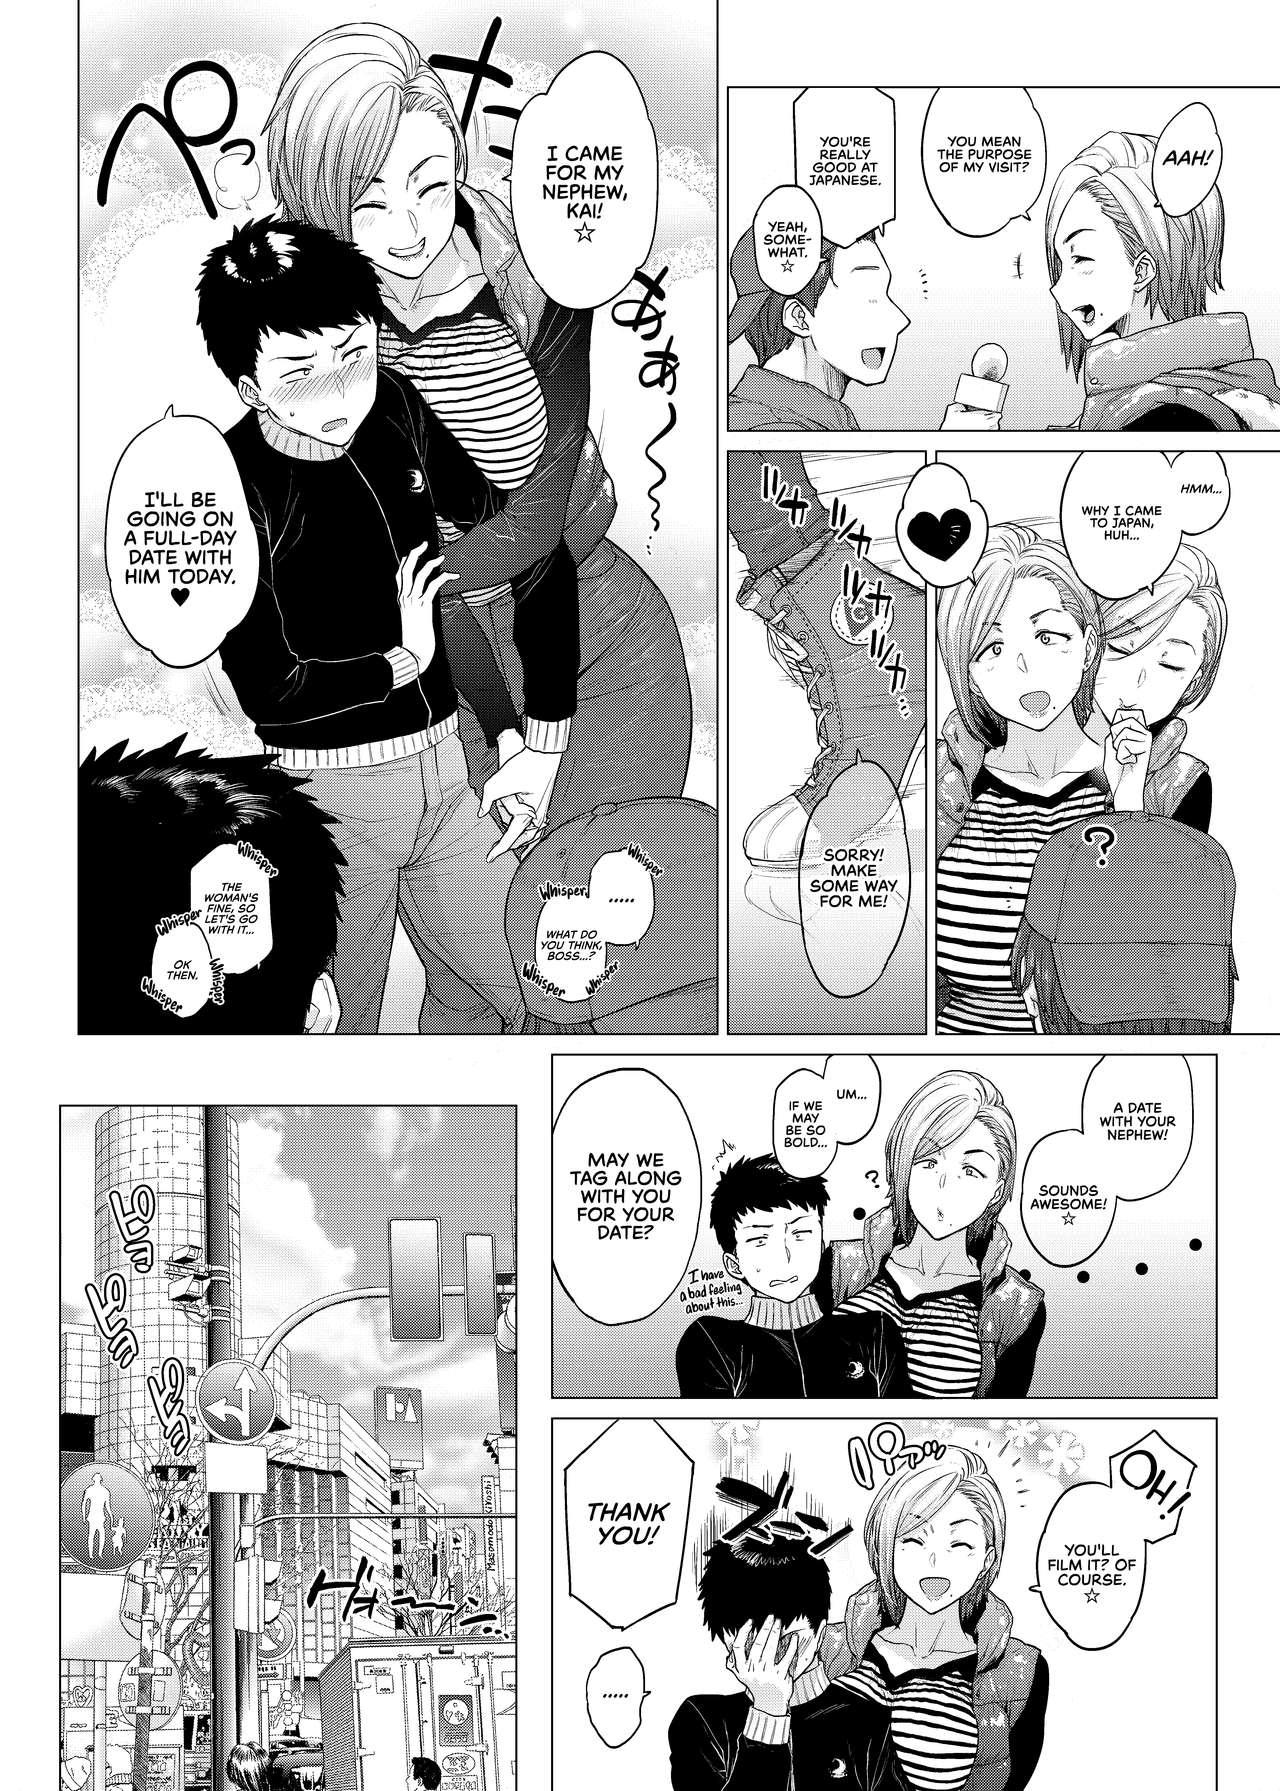 Naked Why did you オーバー the sea? | Why did you cross over the sea? - Original Friend - Page 5